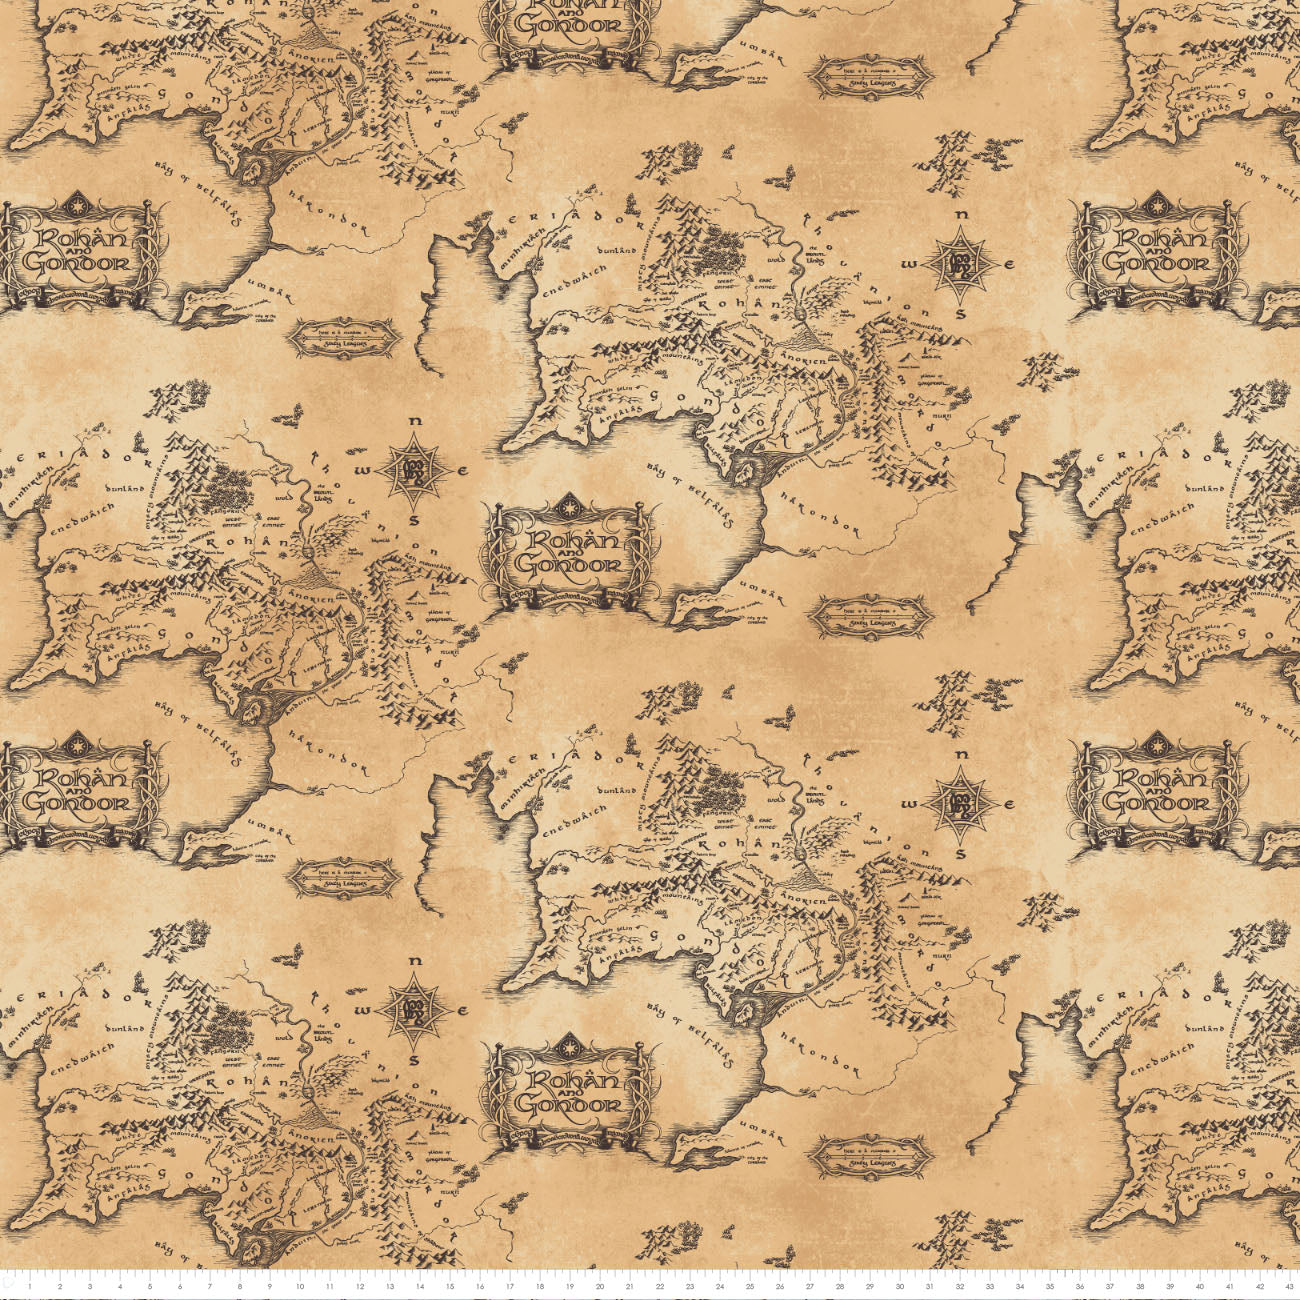 Lord of the Rings Decor Map of Middle Earth Lord of the Rings Map Lord of